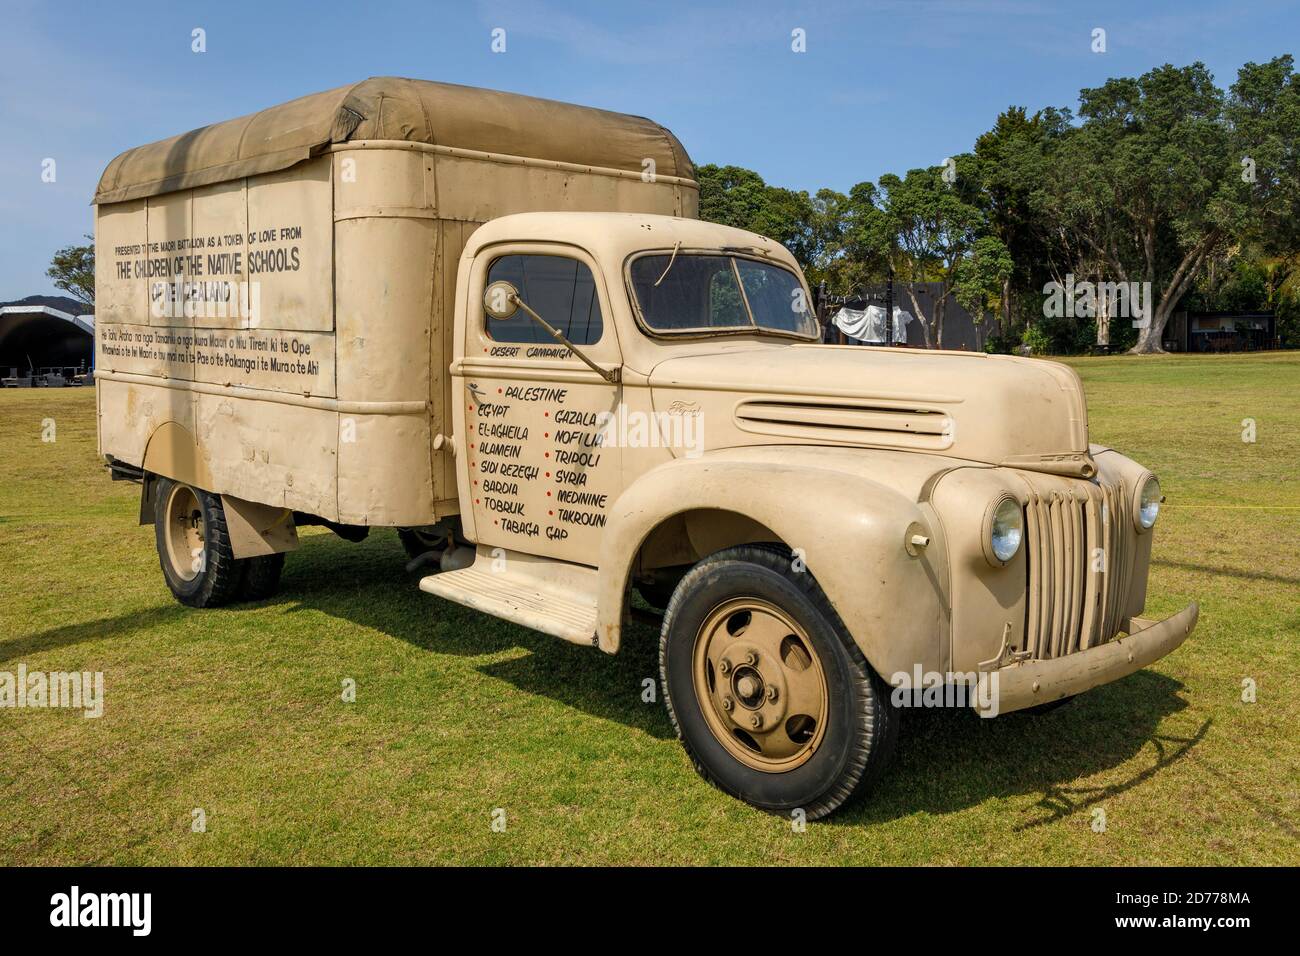 From 1941 wherever the New Zealand Battalion went, this Ford truck mobile canteen would follow. Now located at the Waitangi Treaty Grounds, NZ. Stock Photo